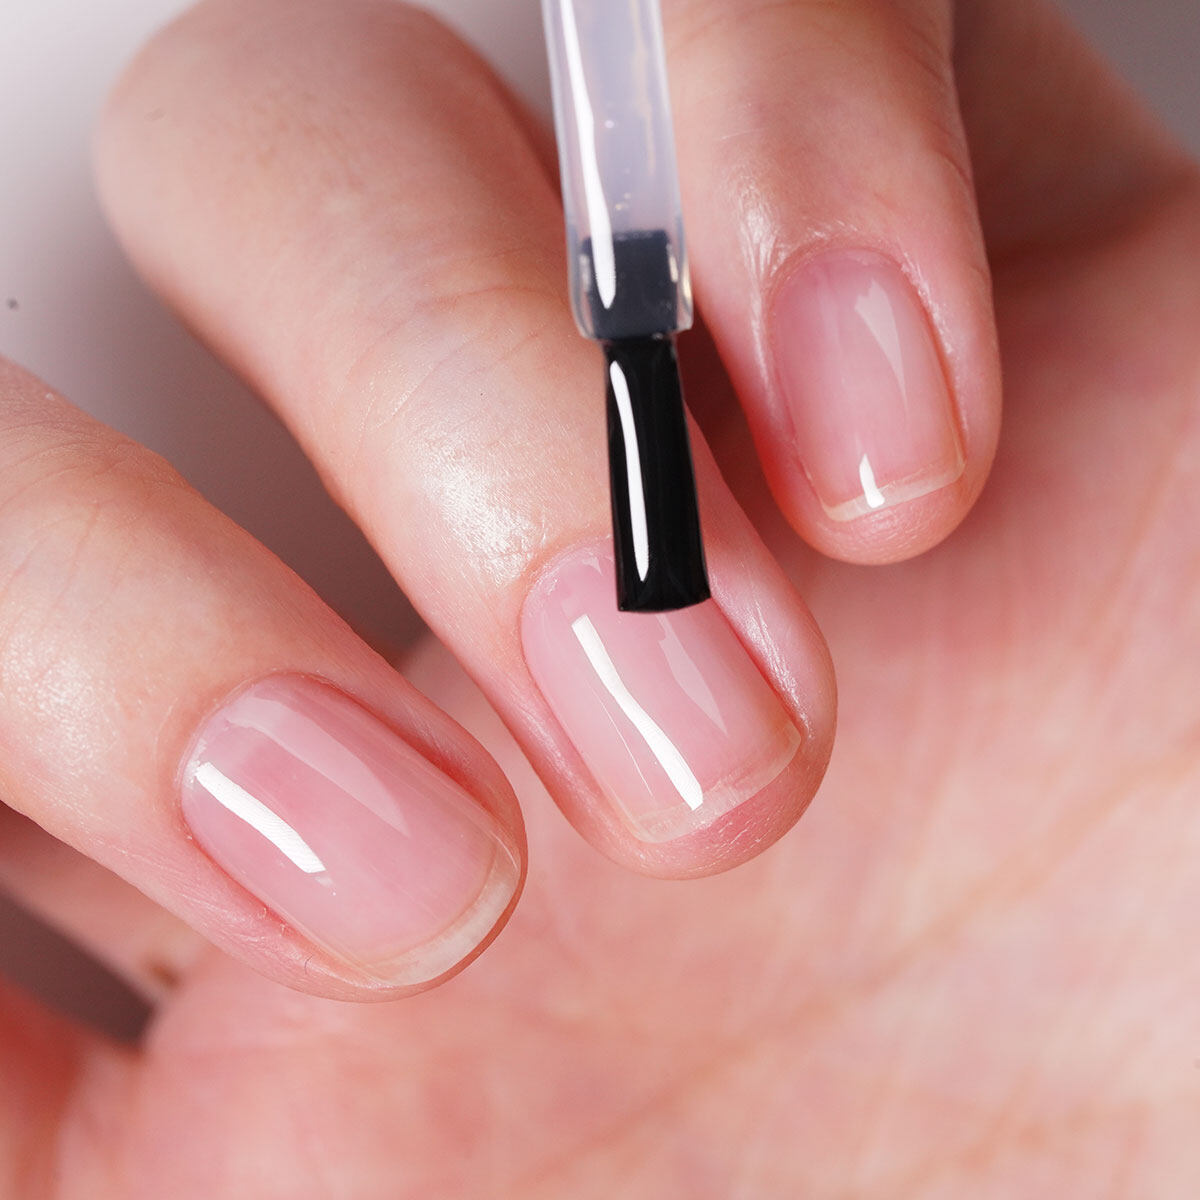 Glossy Top Coat vs. Matte Top Coat: Which is the Perfect Finish for Your Nails?